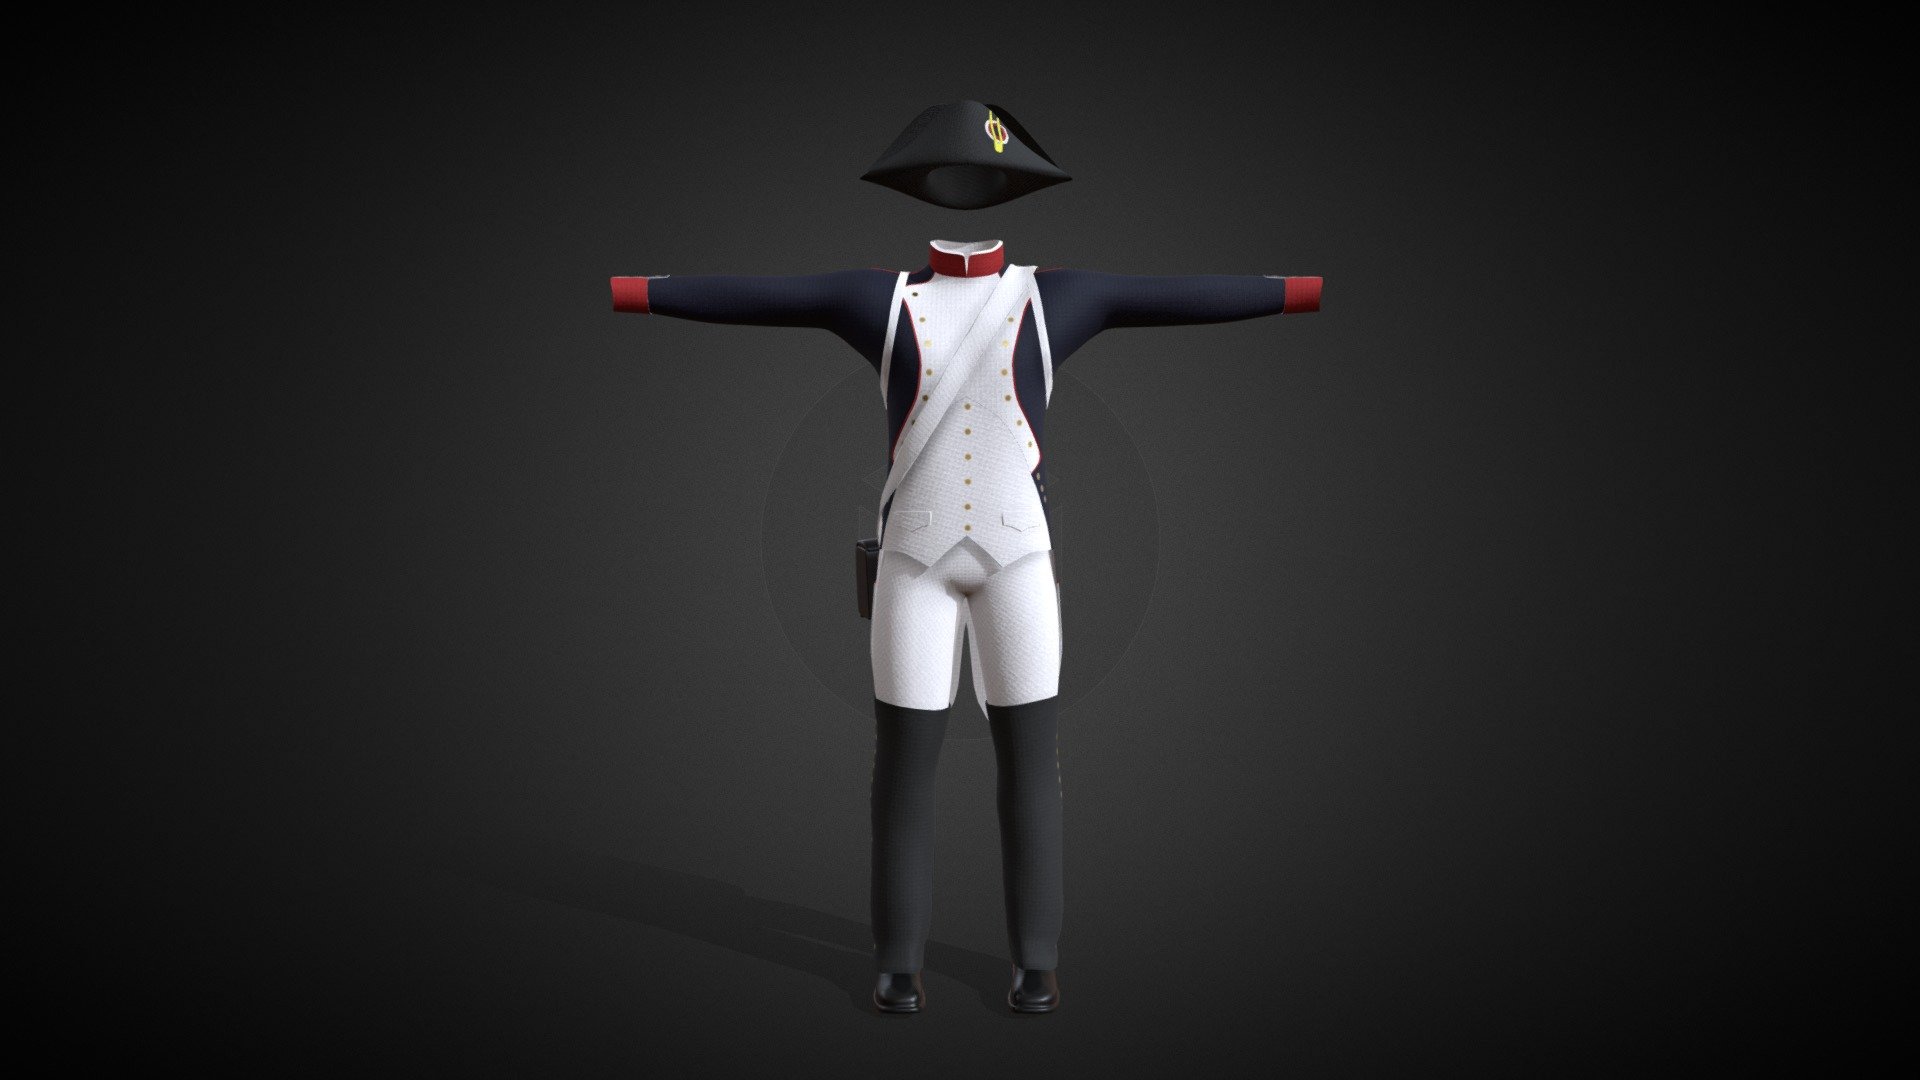 The uniform of the French Line Infantry (Line Fusiliers) was officialy worn by Napoleon's soldiers from the time of the revolution until 1806. Afterward, new uniforms began production. However, it took some time to fully replace the older uniforms, so some of them were still in use even at the beginning of the invasion of Russia. This 3D model was created based on a uniform from the Austerlitz battlefield 3d model